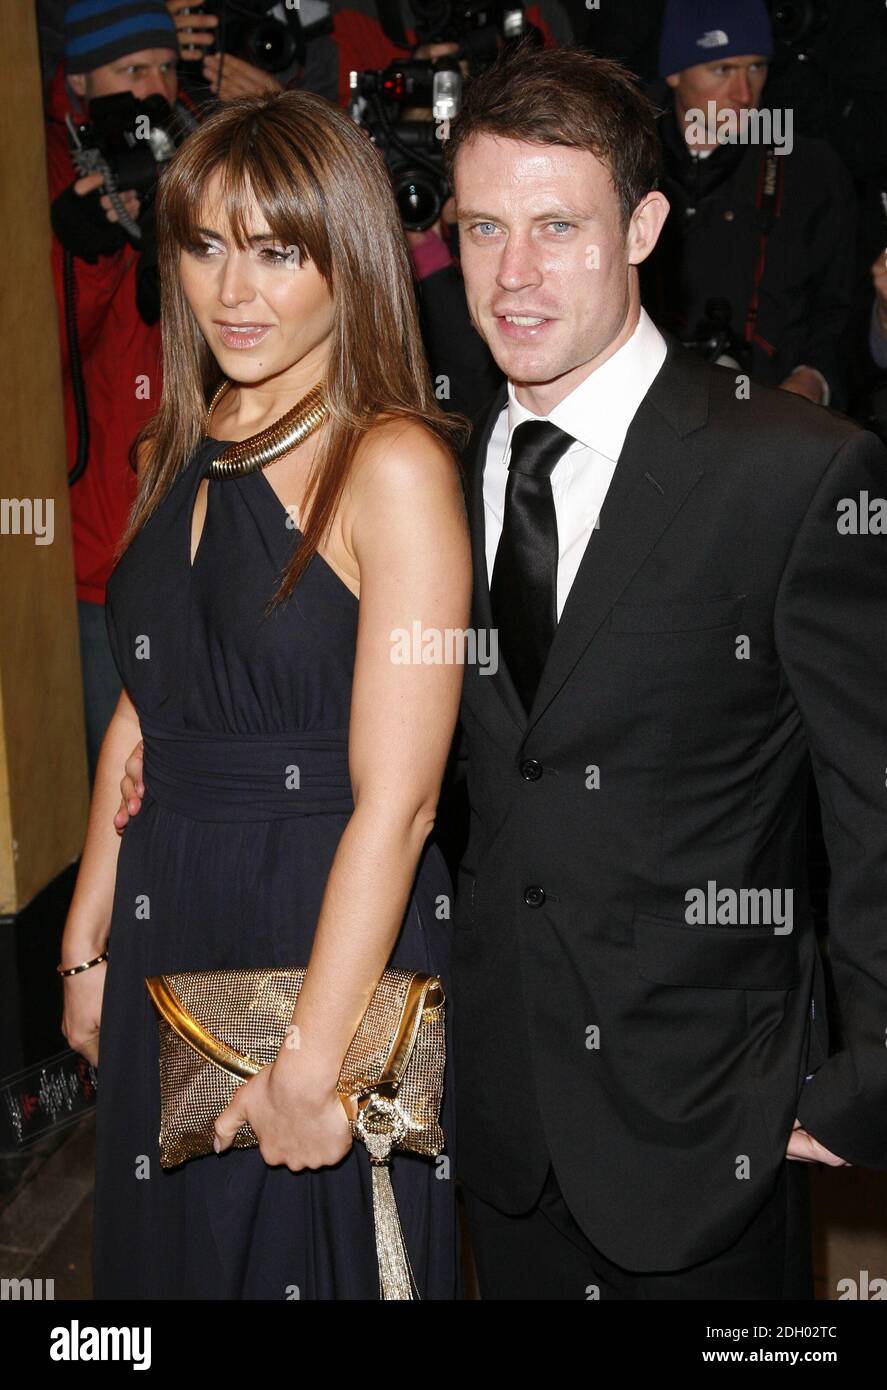 Wayne Bridge and girlfriend model Vanessa Perroncel arrive at the Cystic Fibrosis 'Liv' charity event at The Dorchester Hotel in central London. Stock Photo